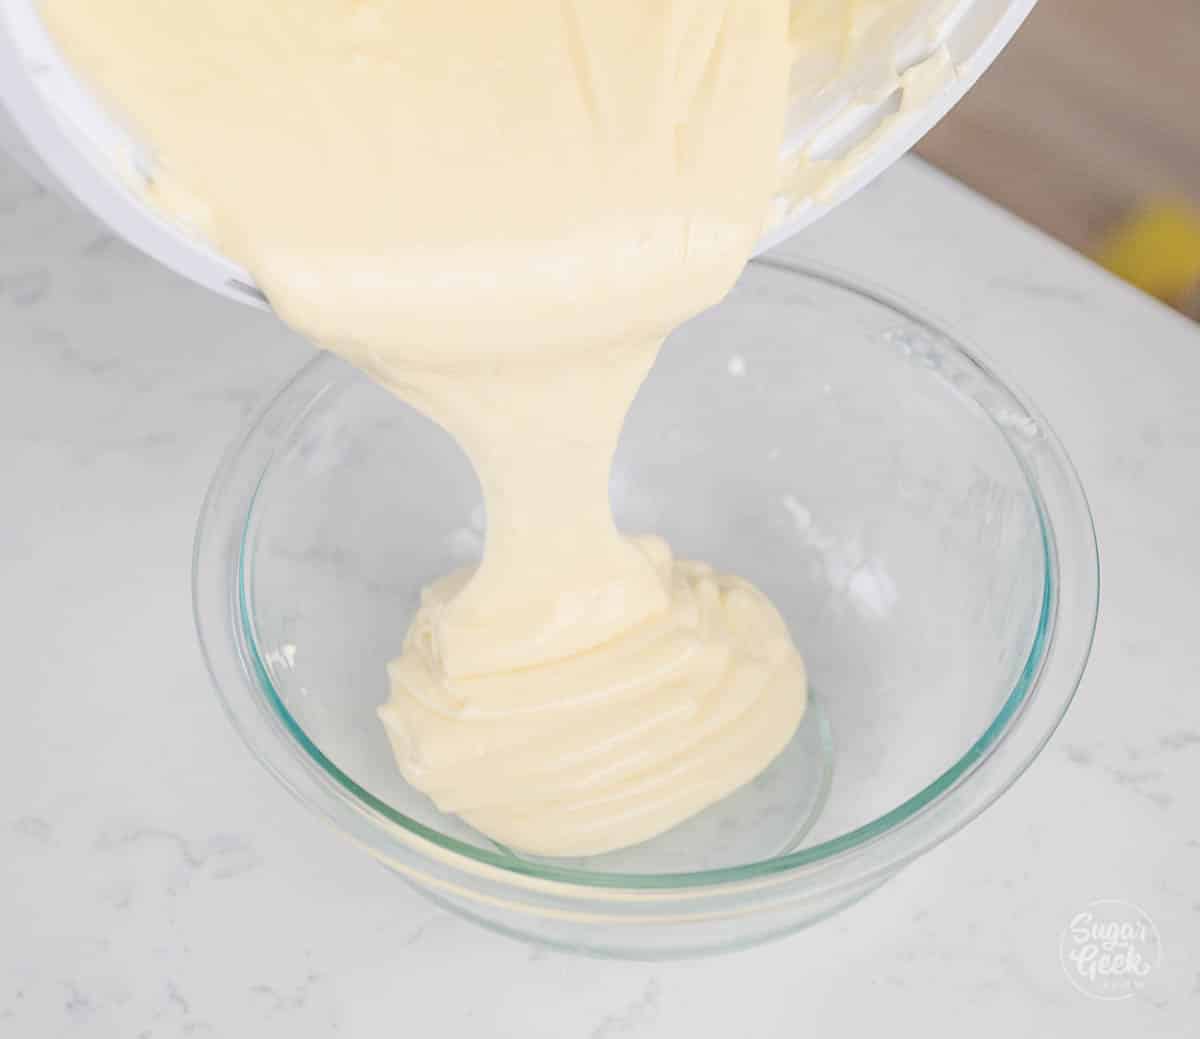 cheesecake batter pouring from a white bowl into a smaller clear bowl